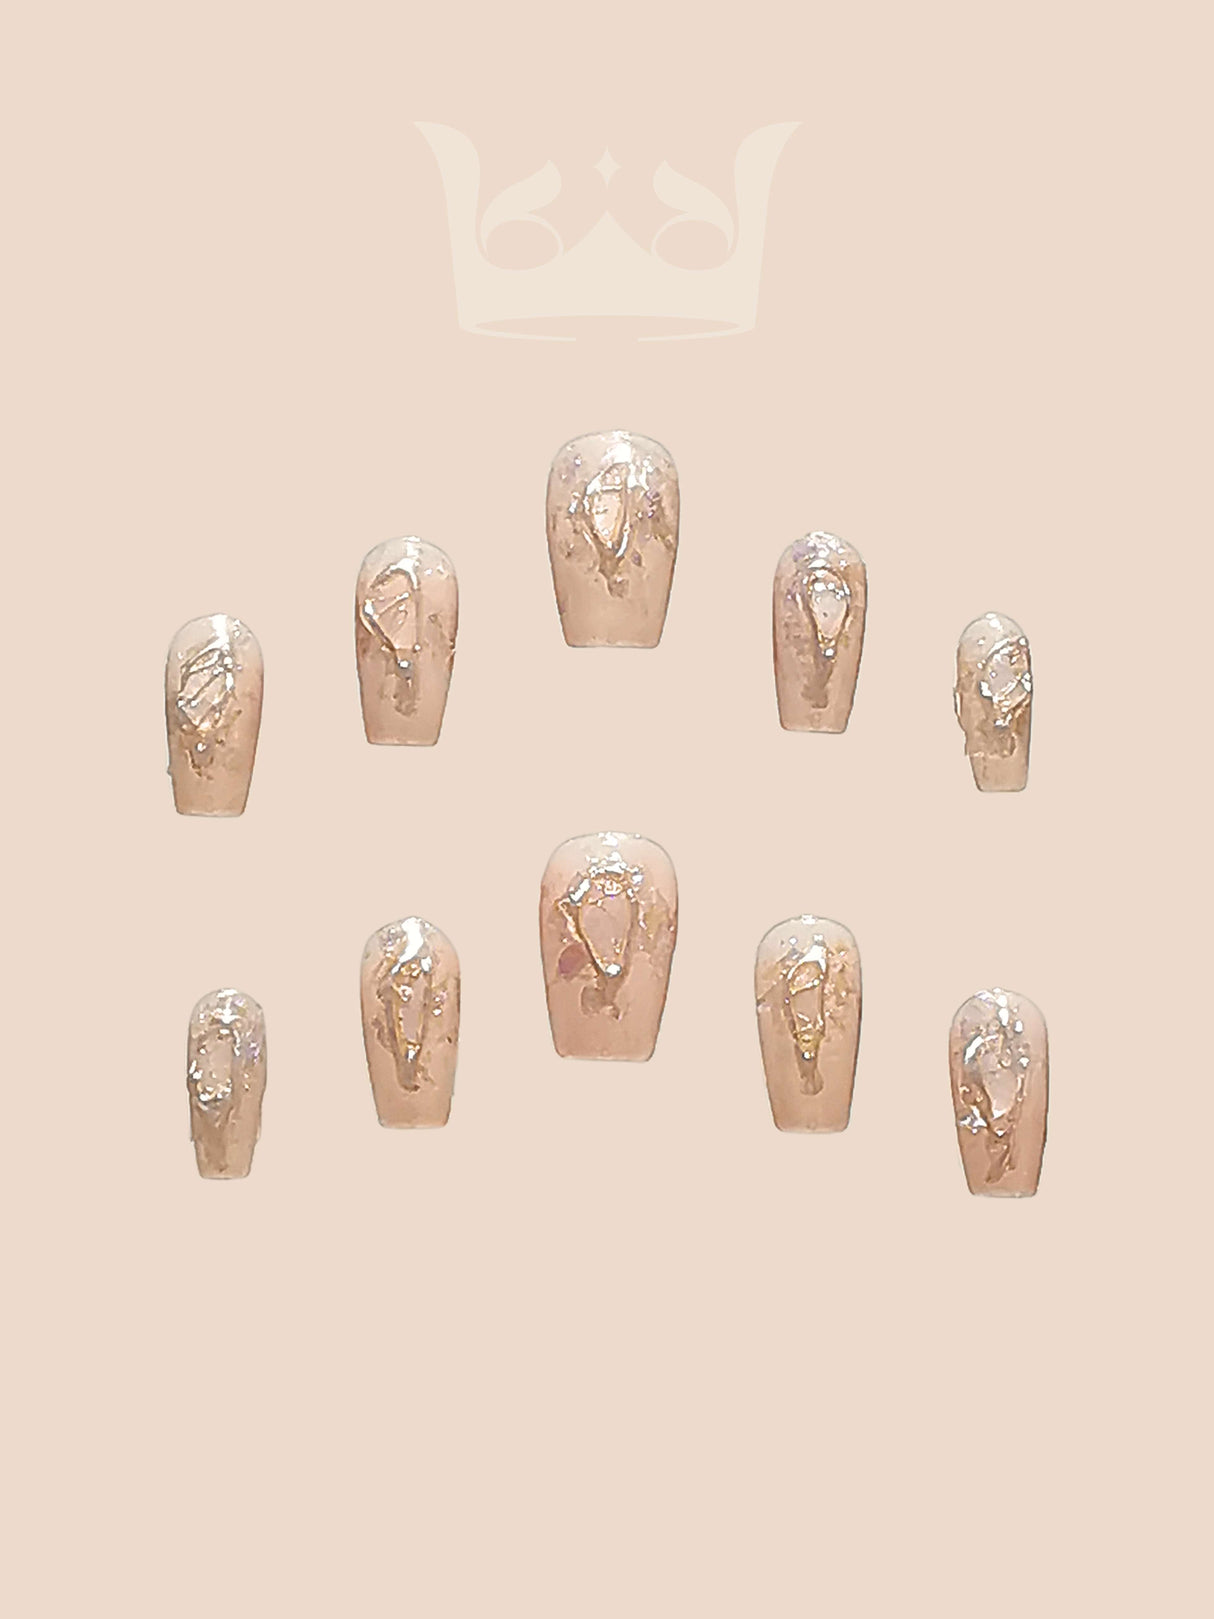 These false nails have a nude base with metallic gold accents in abstract patterns and are designed for a stylish and fancy look.